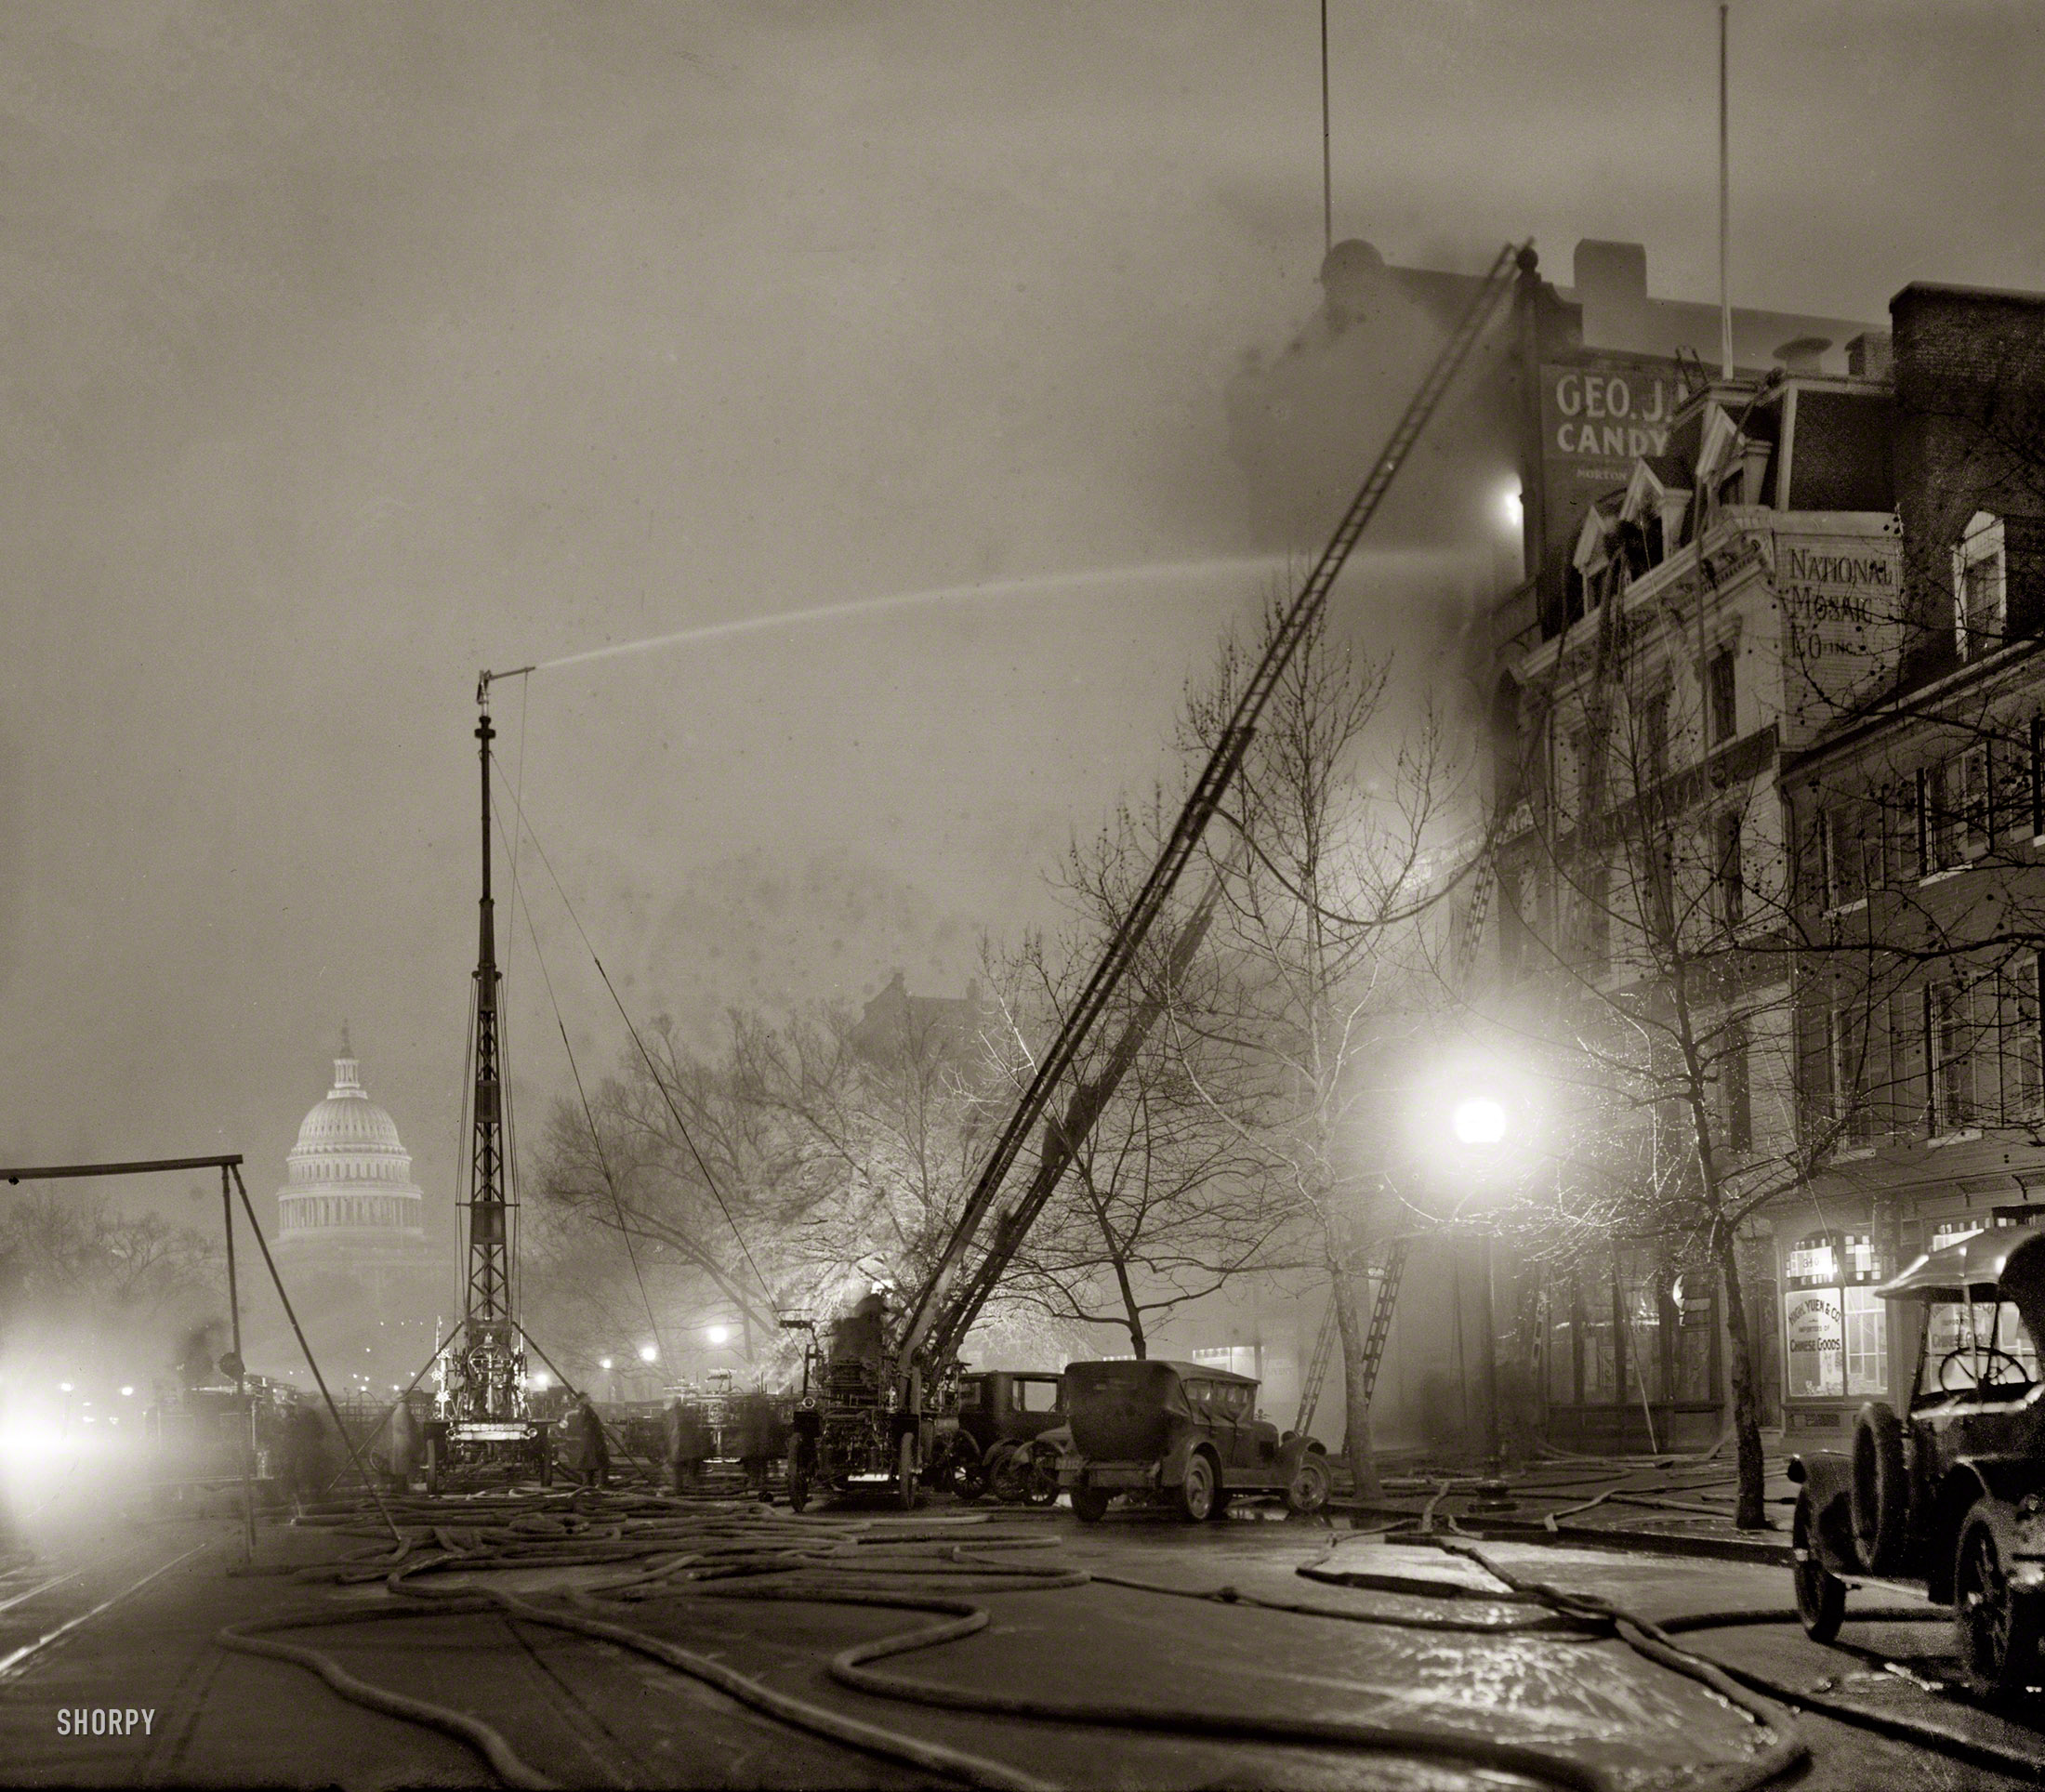 December 28, 1925. "G.J. Mueller Fire." A five-alarm fire at George J. Mueller Candy Co. in Chinatown at 336 Pennsylvania Avenue N.W., in view of the Capitol. National Photo Company Collection glass negative. View full size.